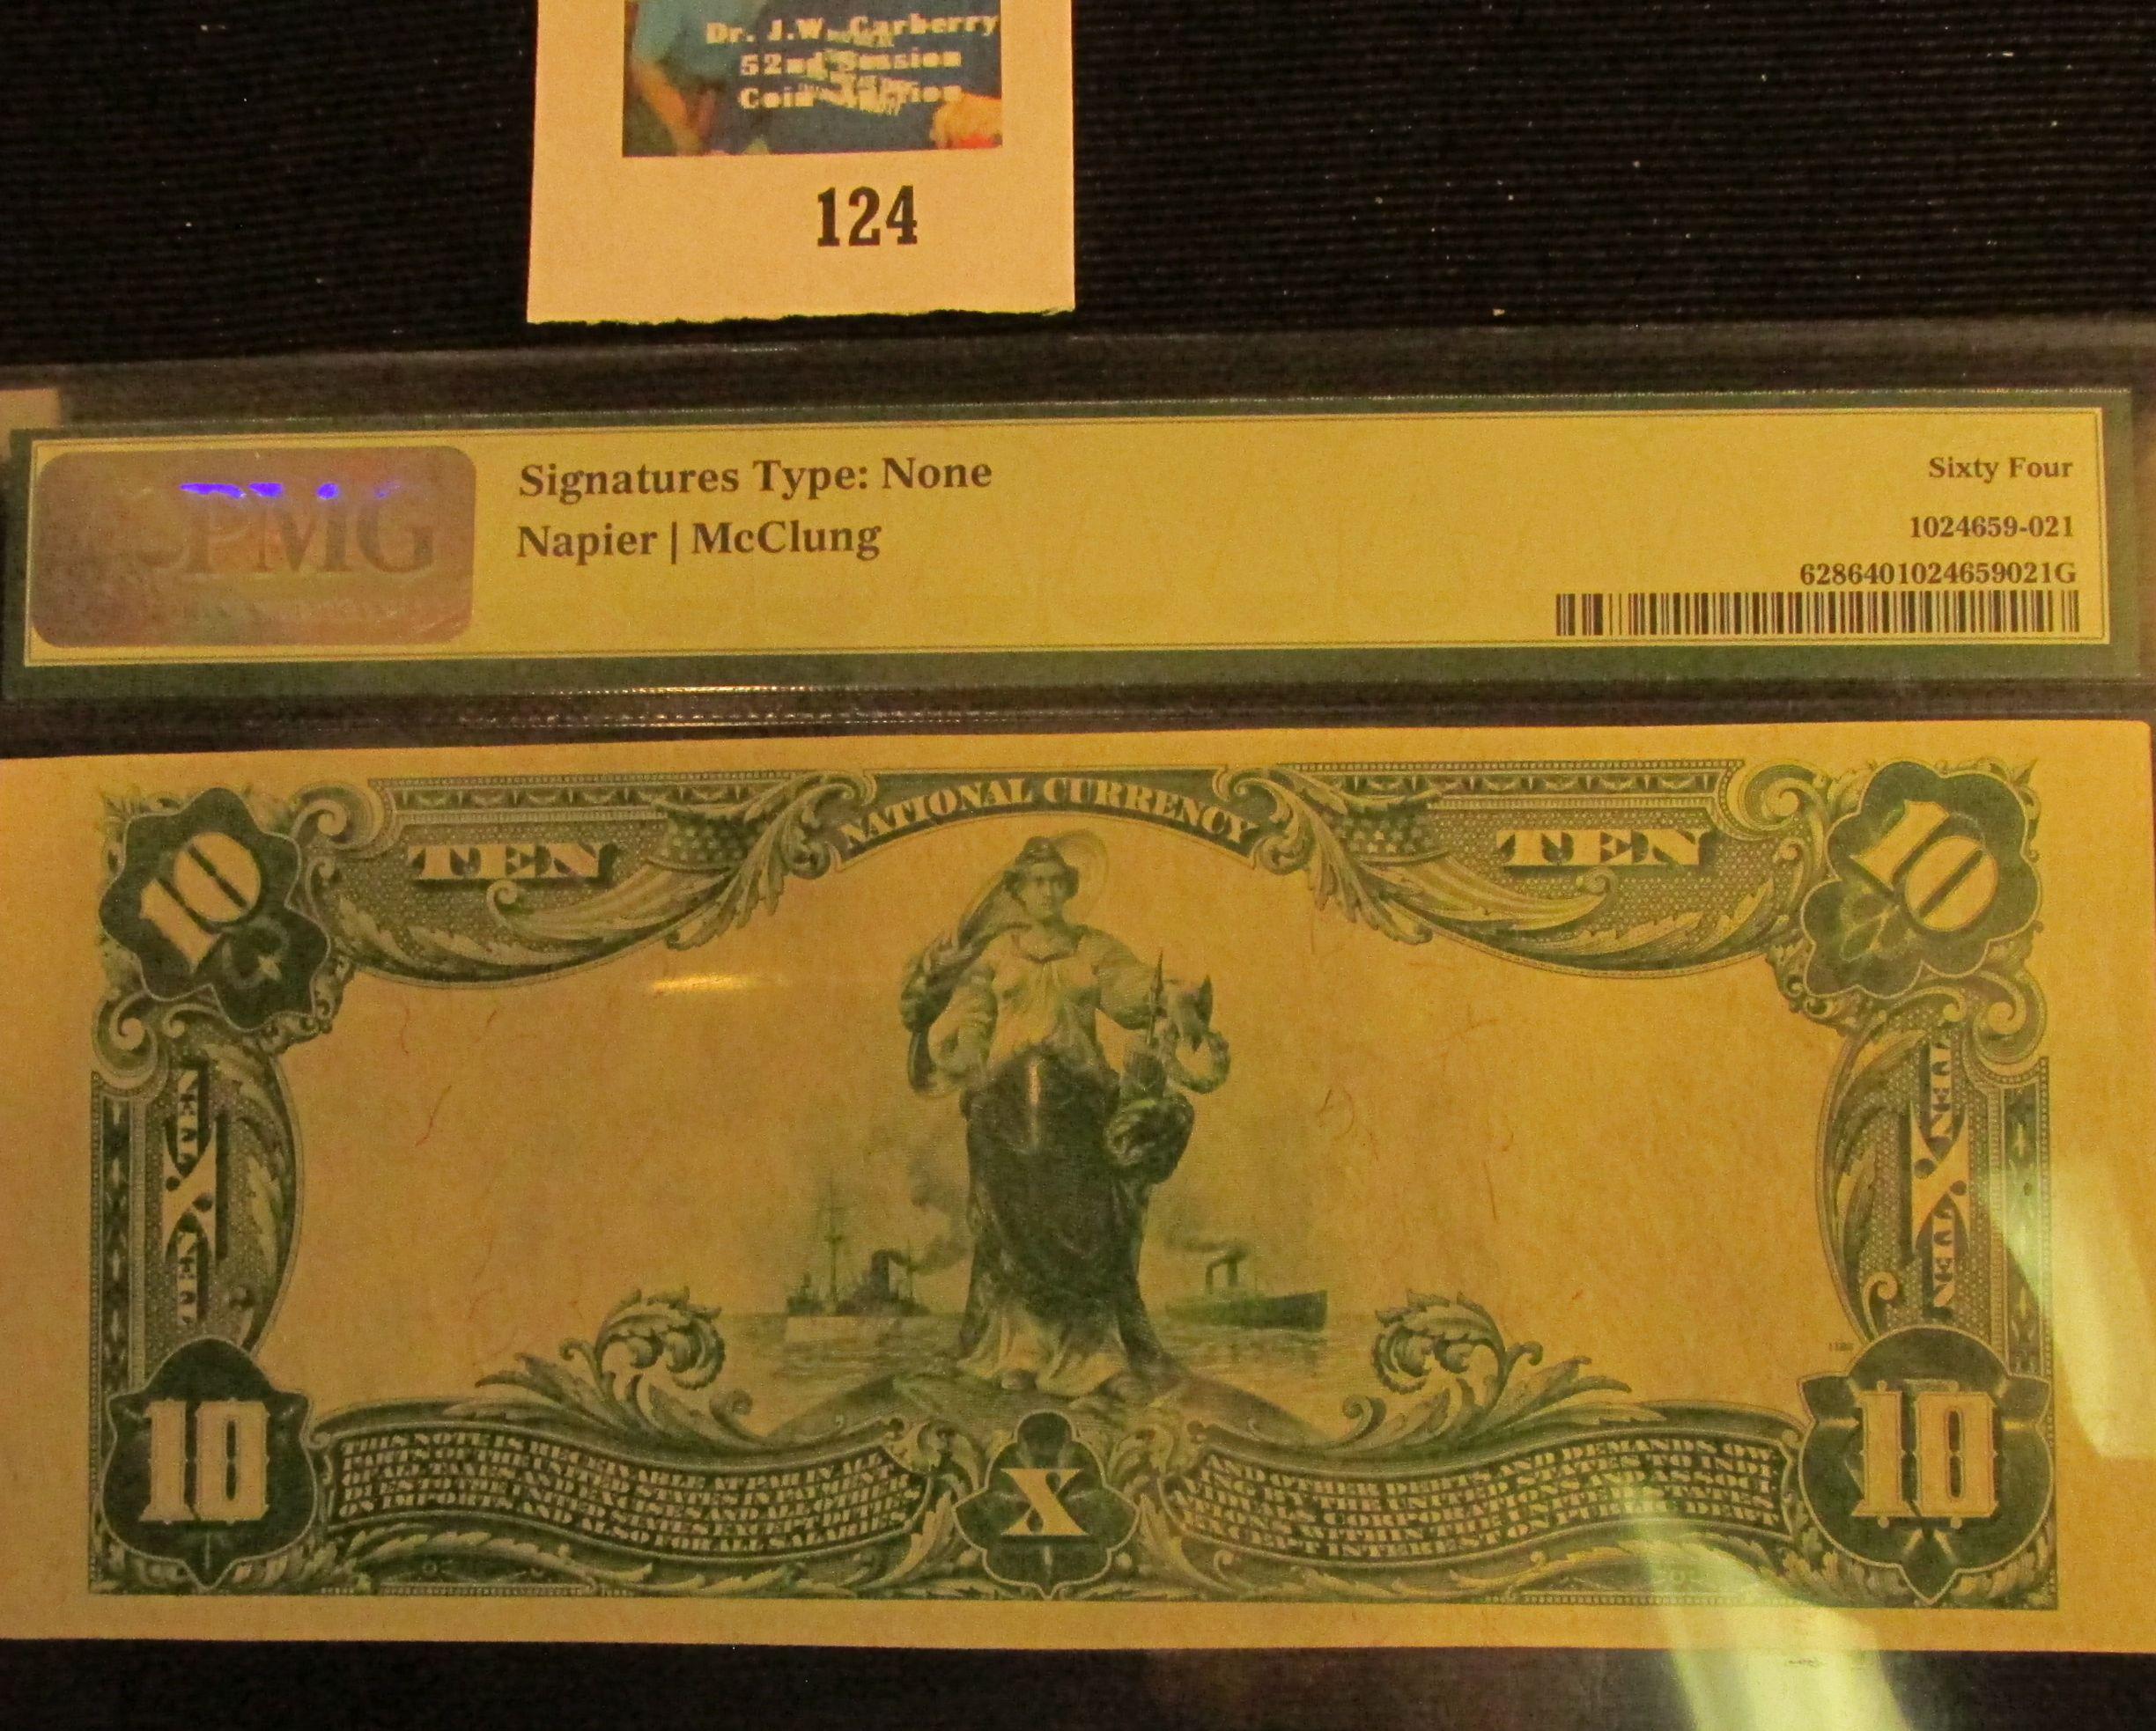 Series 1902 PMG certified and holdered "The First National Bank of Webster City, Iowa Ch# 1874, Fr#6